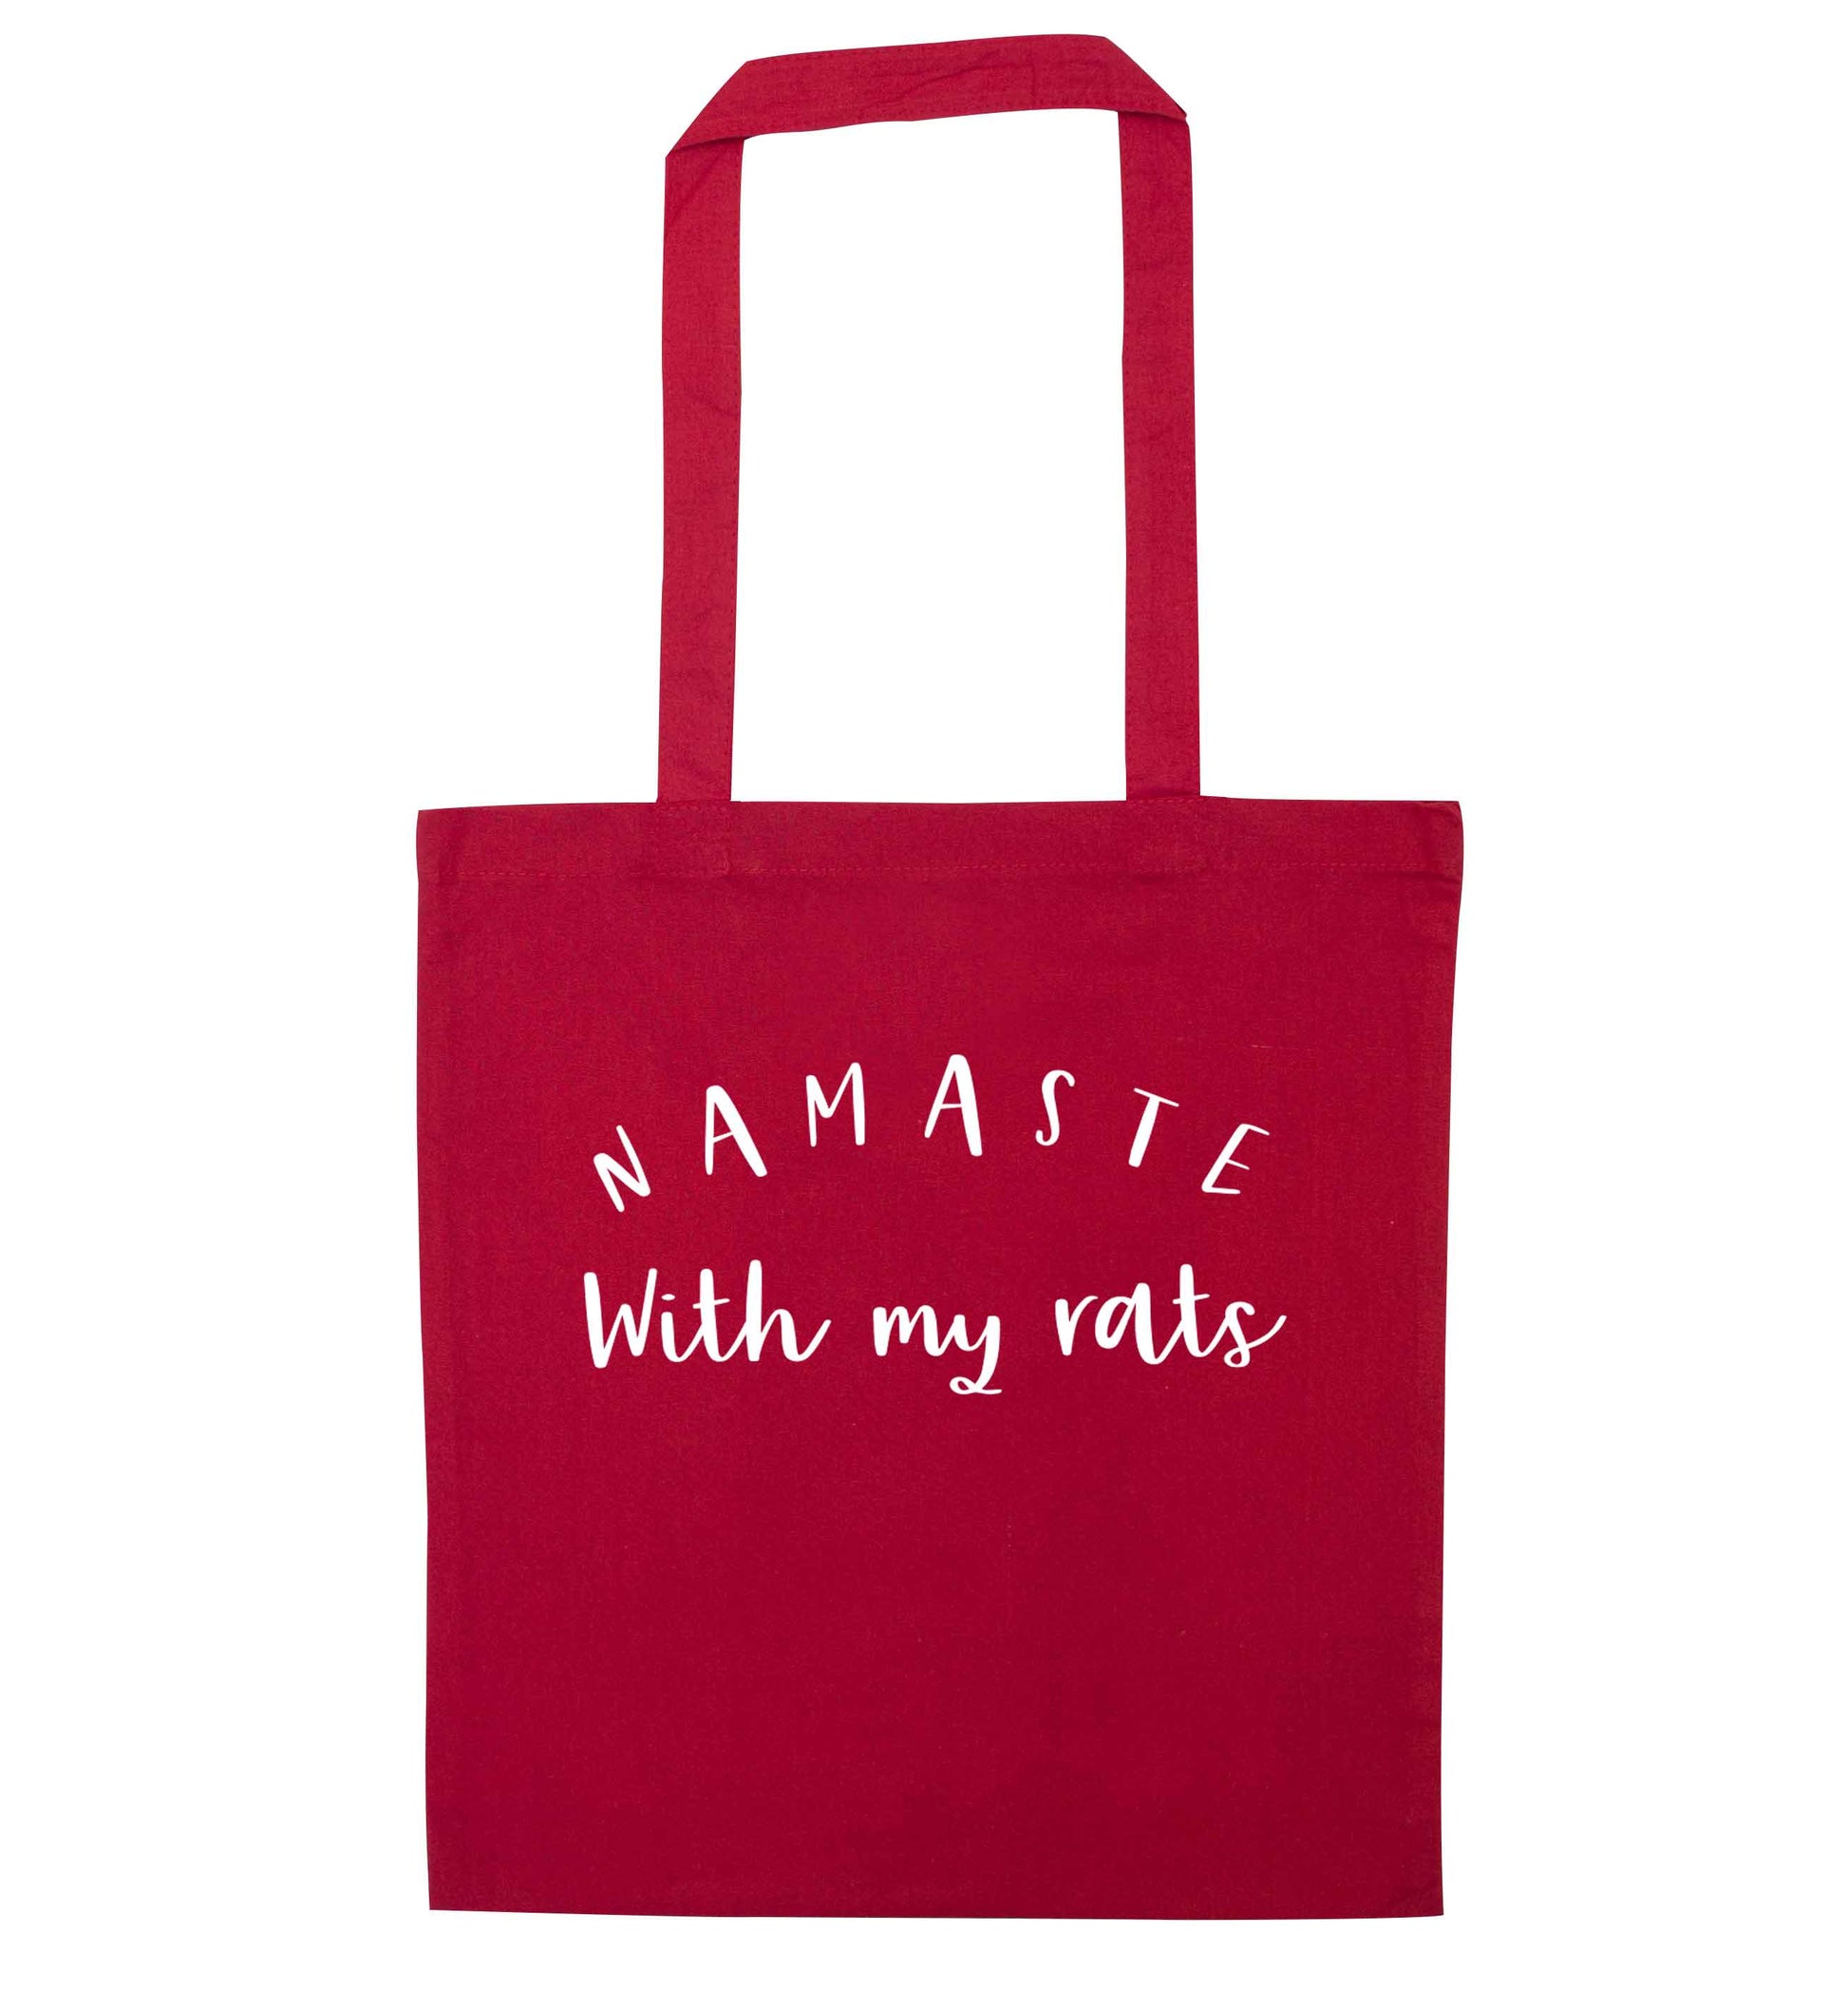 Namaste with my rats red tote bag